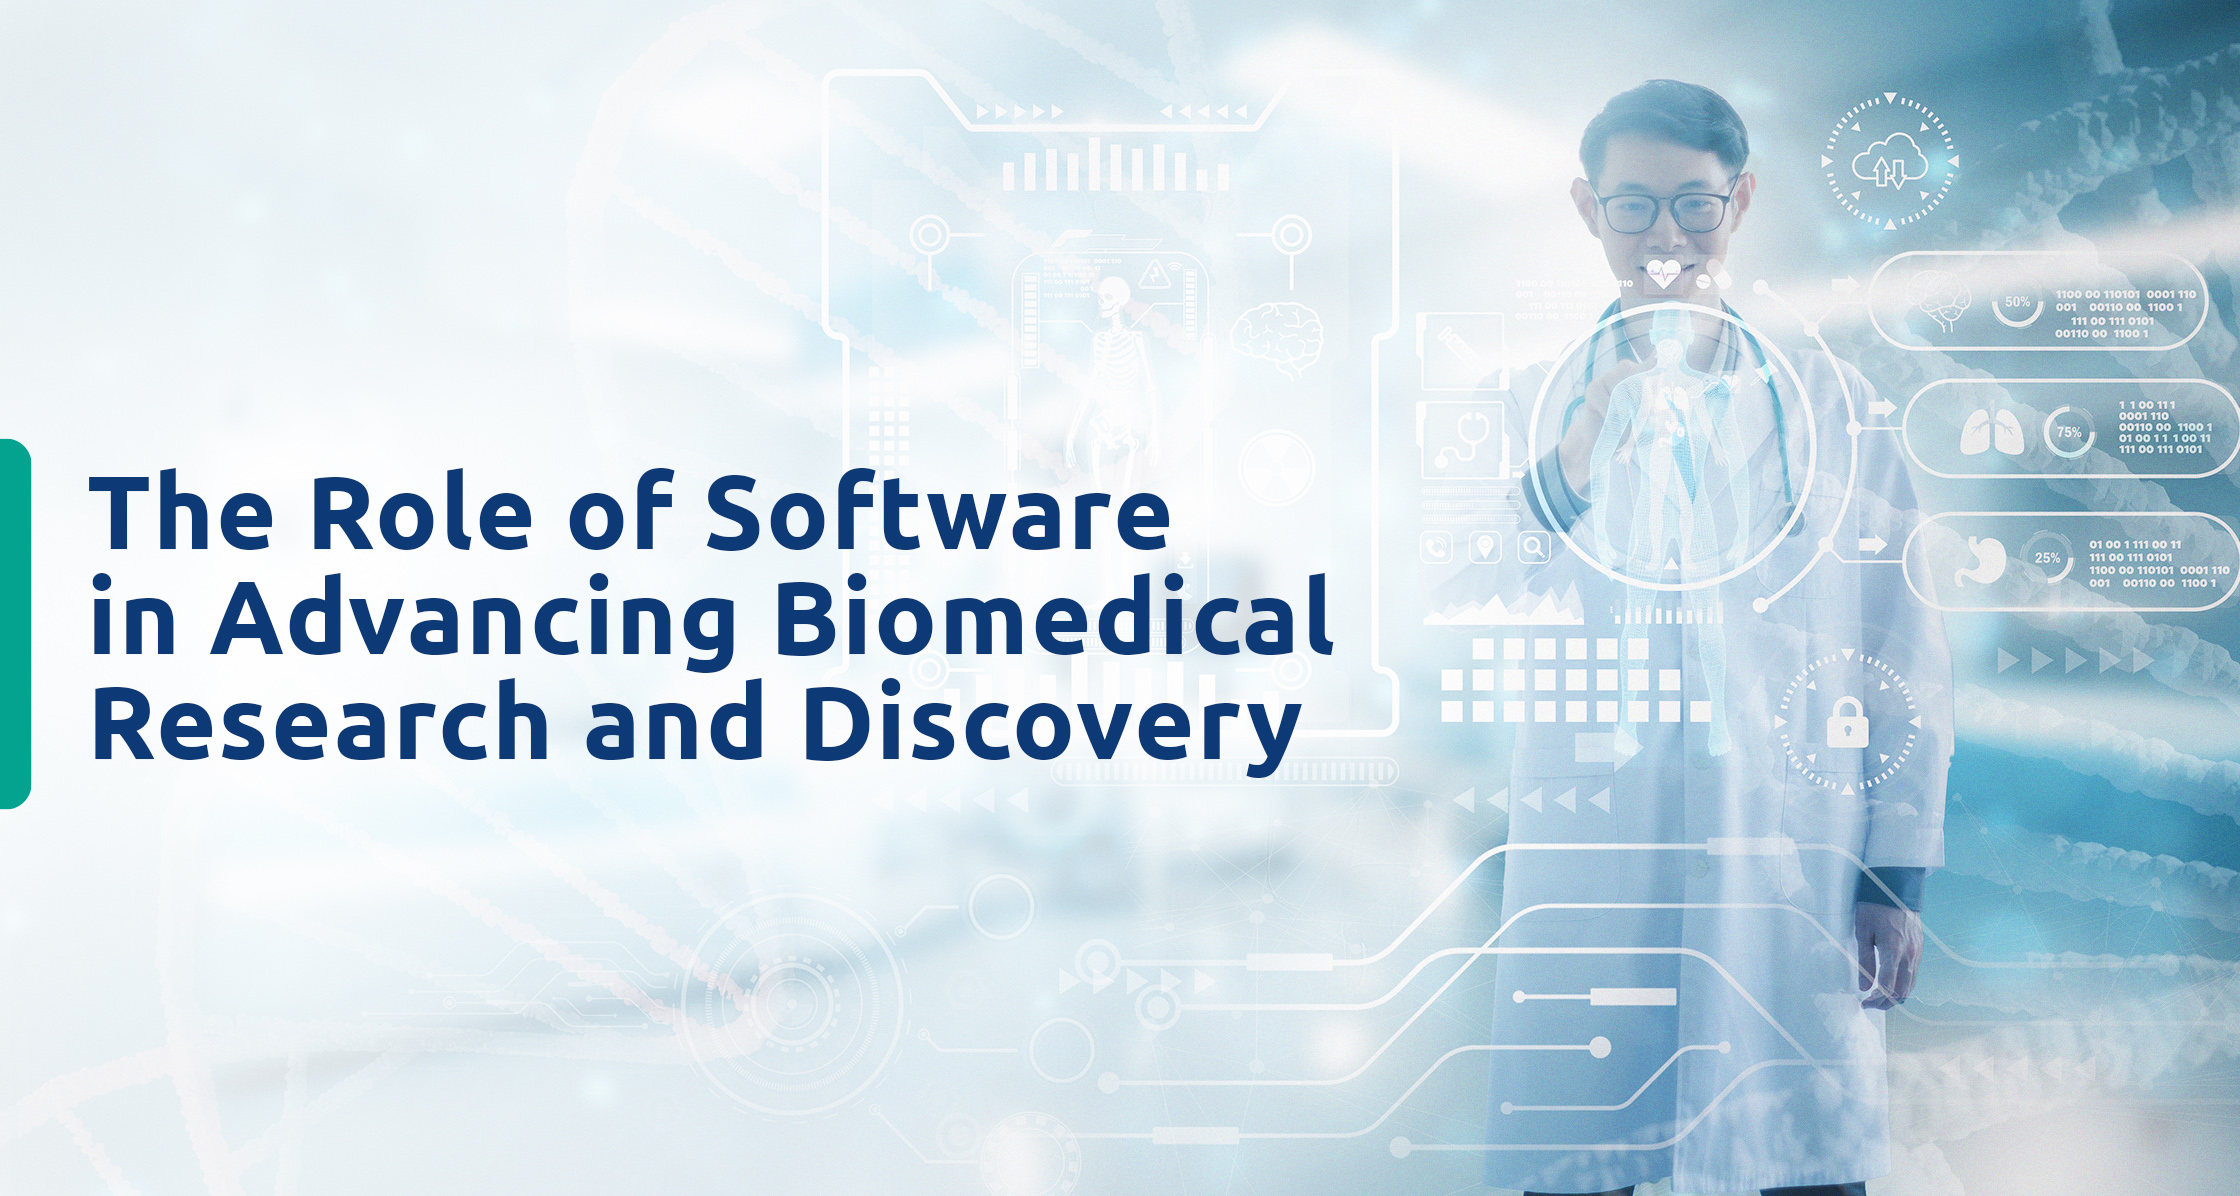 The Role of Software in Advancing Biomedical Research and Discovery